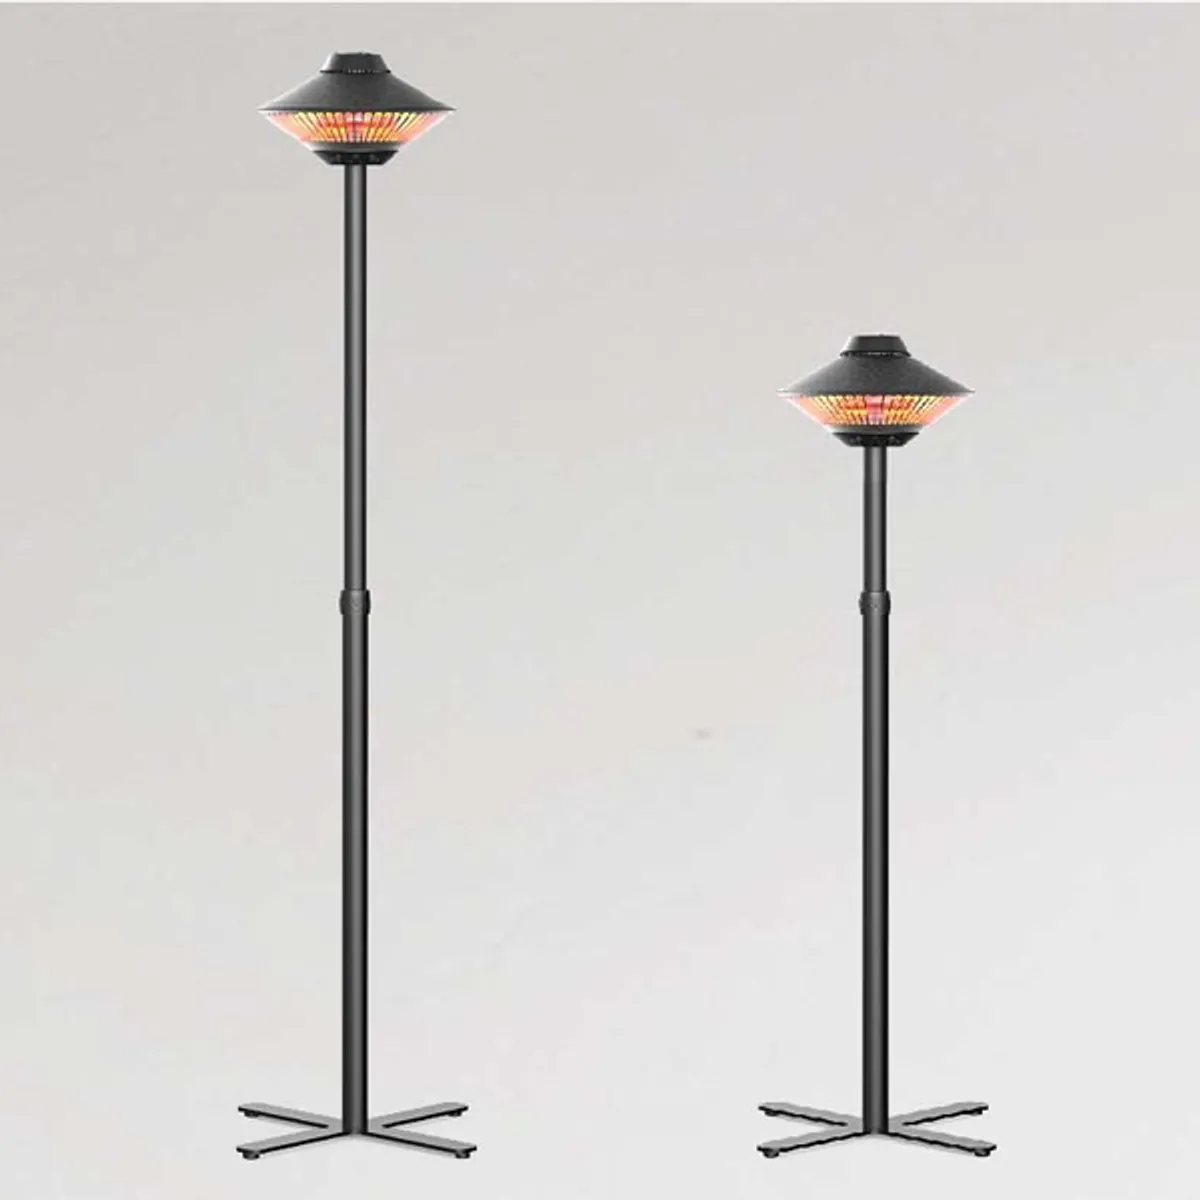 Aurora Infrared floor standing heater Inside Out Contracts3